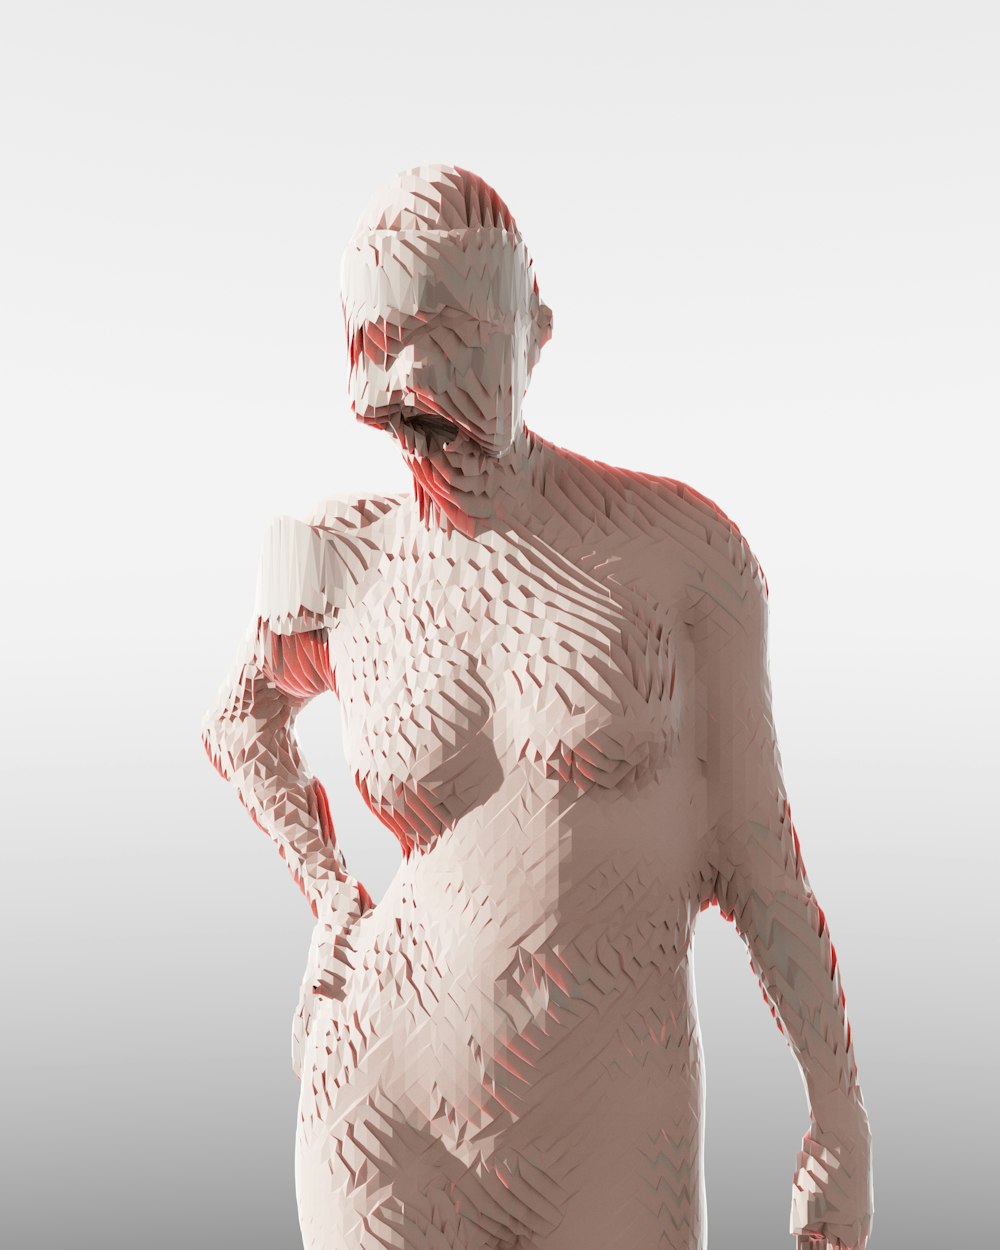 a 3d image of a woman in a body suit